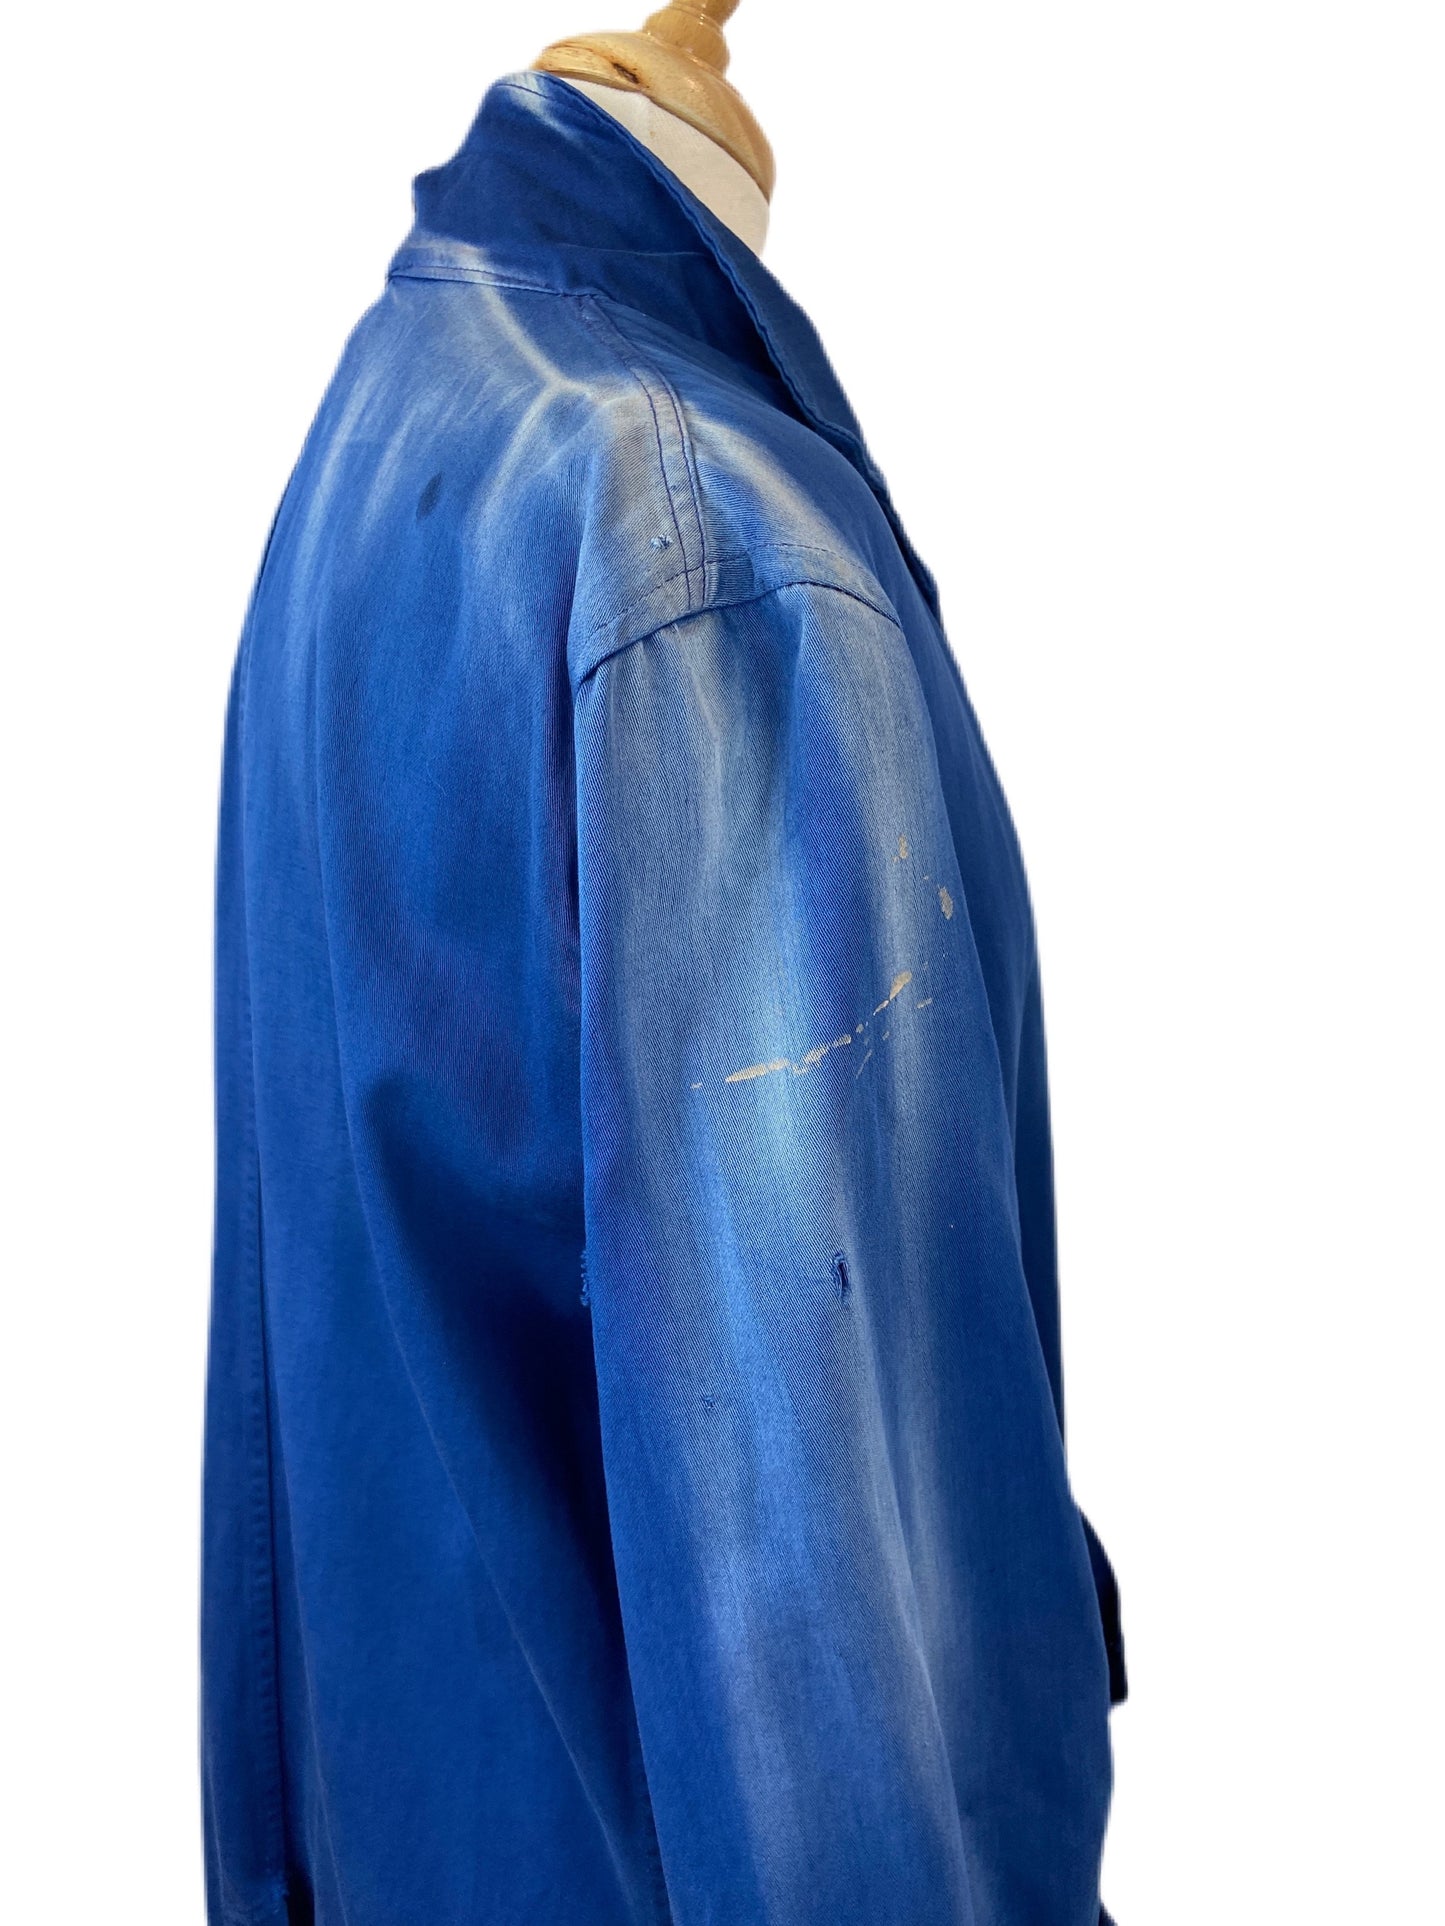 Vintage Workwear 1965 Frontenac Coverall LTD Smock Blue Cotton Distressed Workwear Coat (38)